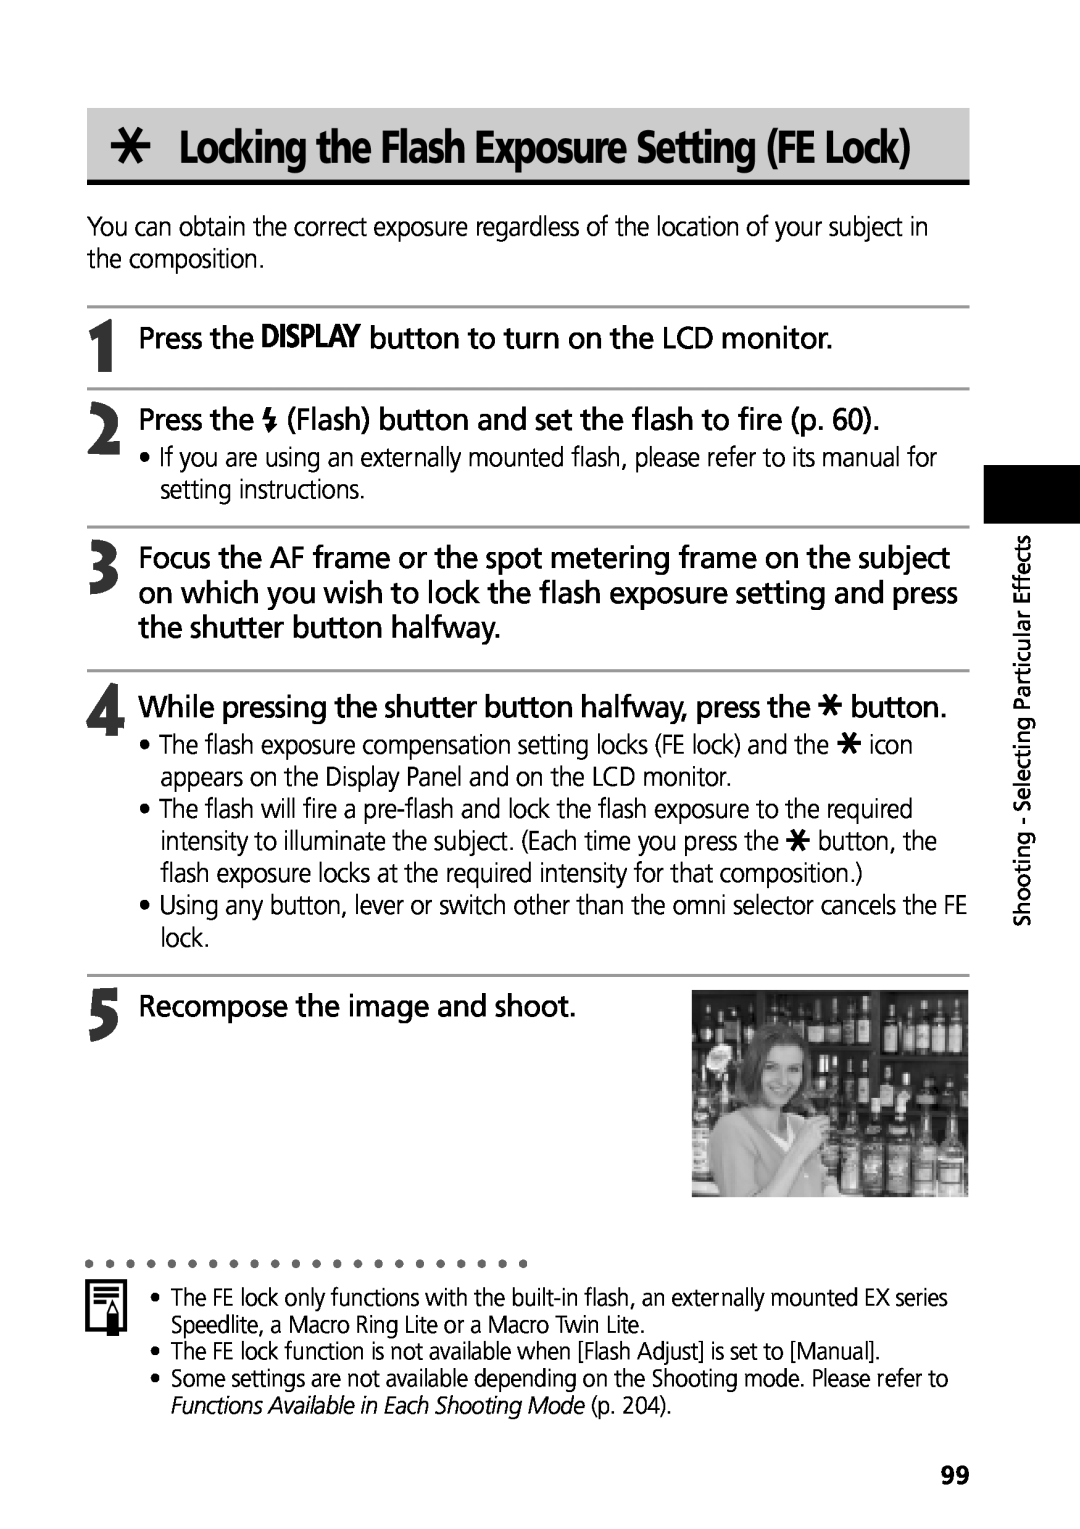 Canon G3 manual Flash button and set the flash to fire p, While pressing the shutter button halfway, press the, Press the 